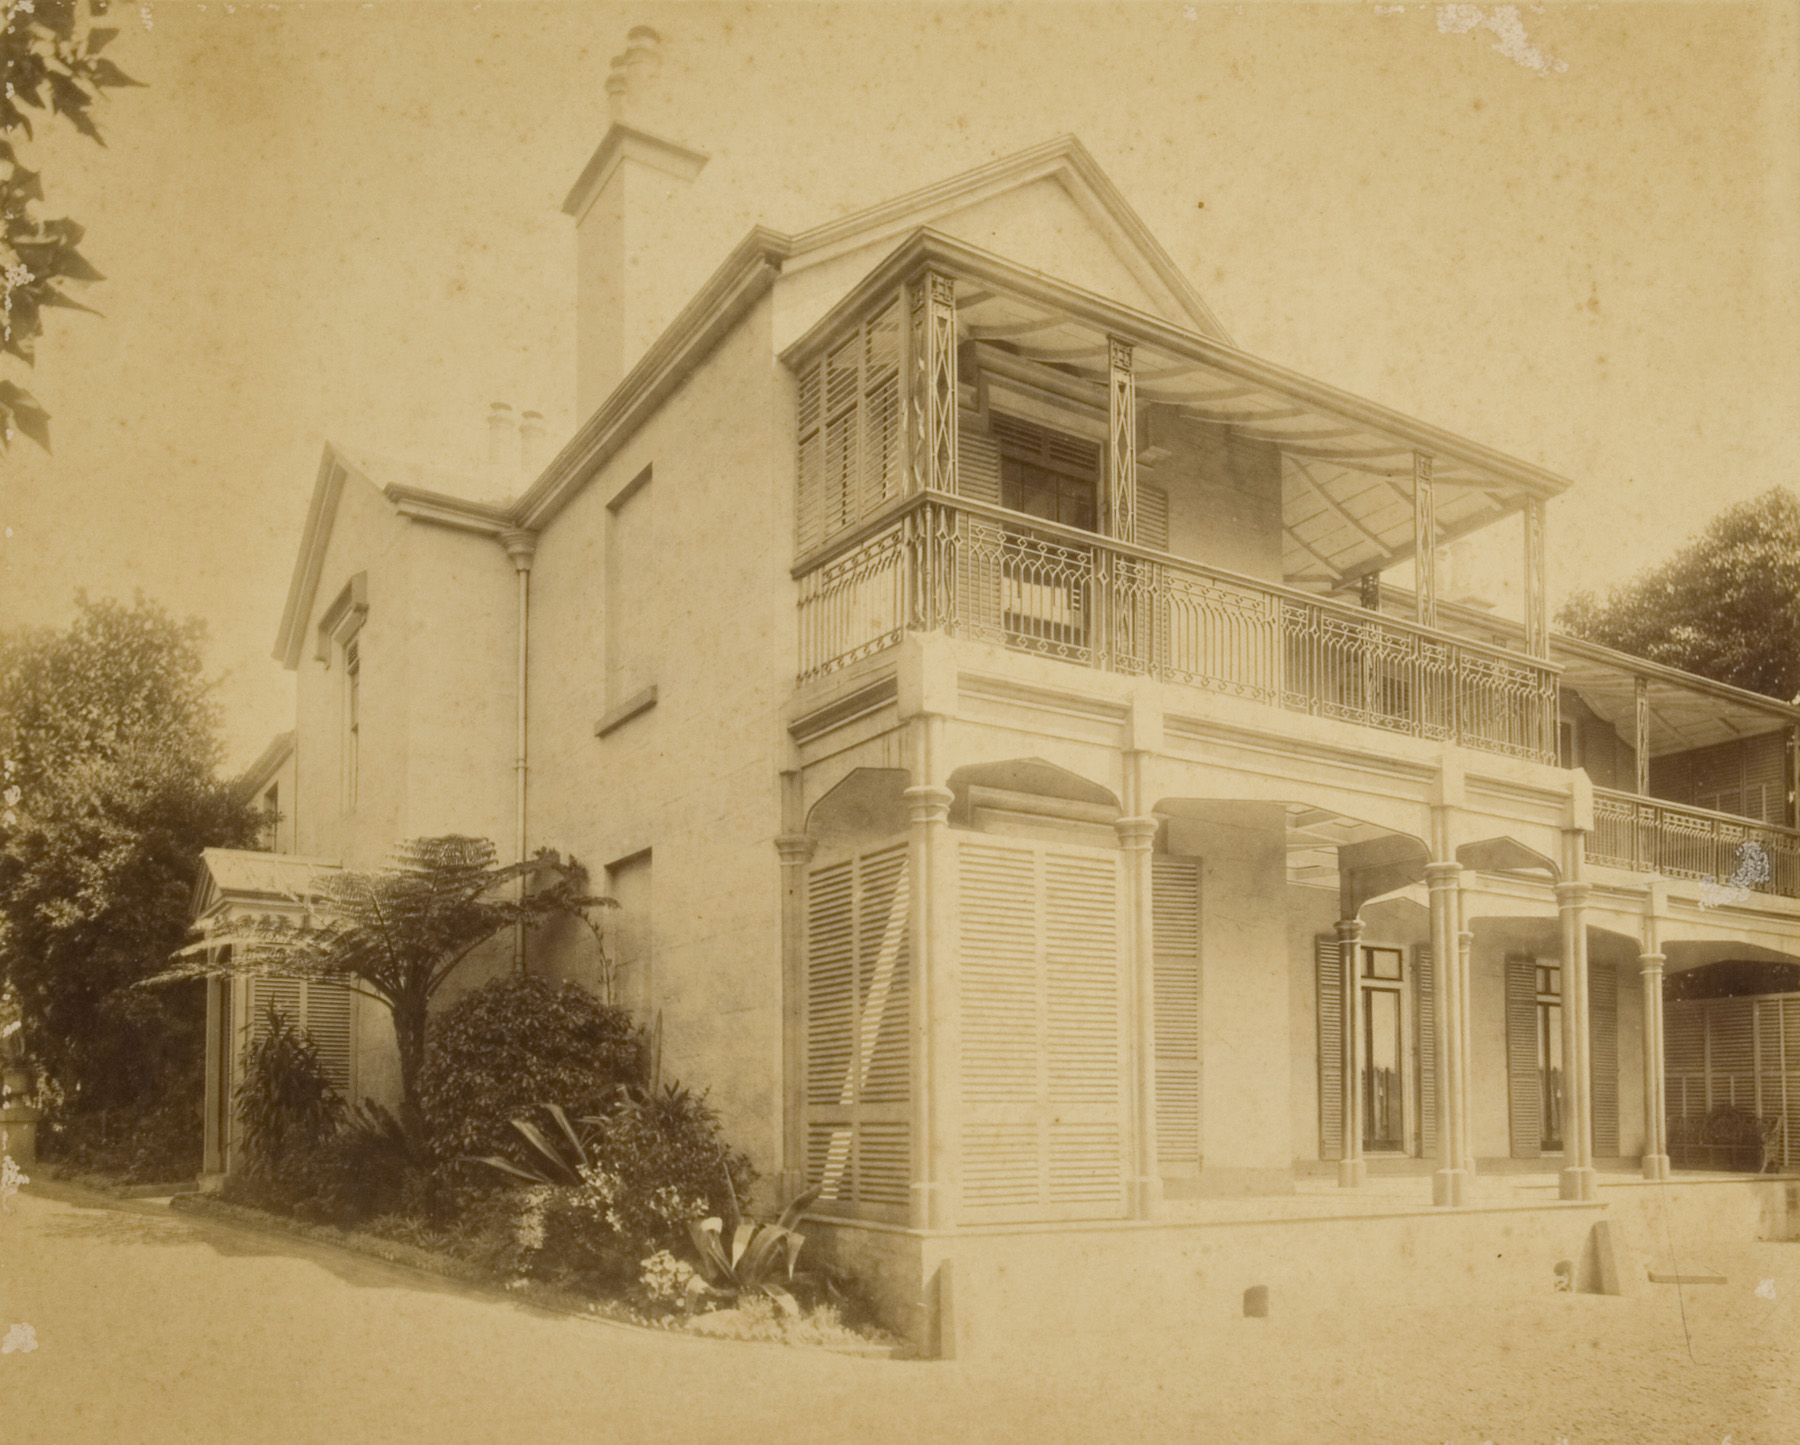 Corner view of Percy Lodge, Potts Point, ca.1895 / Kerry & Co.